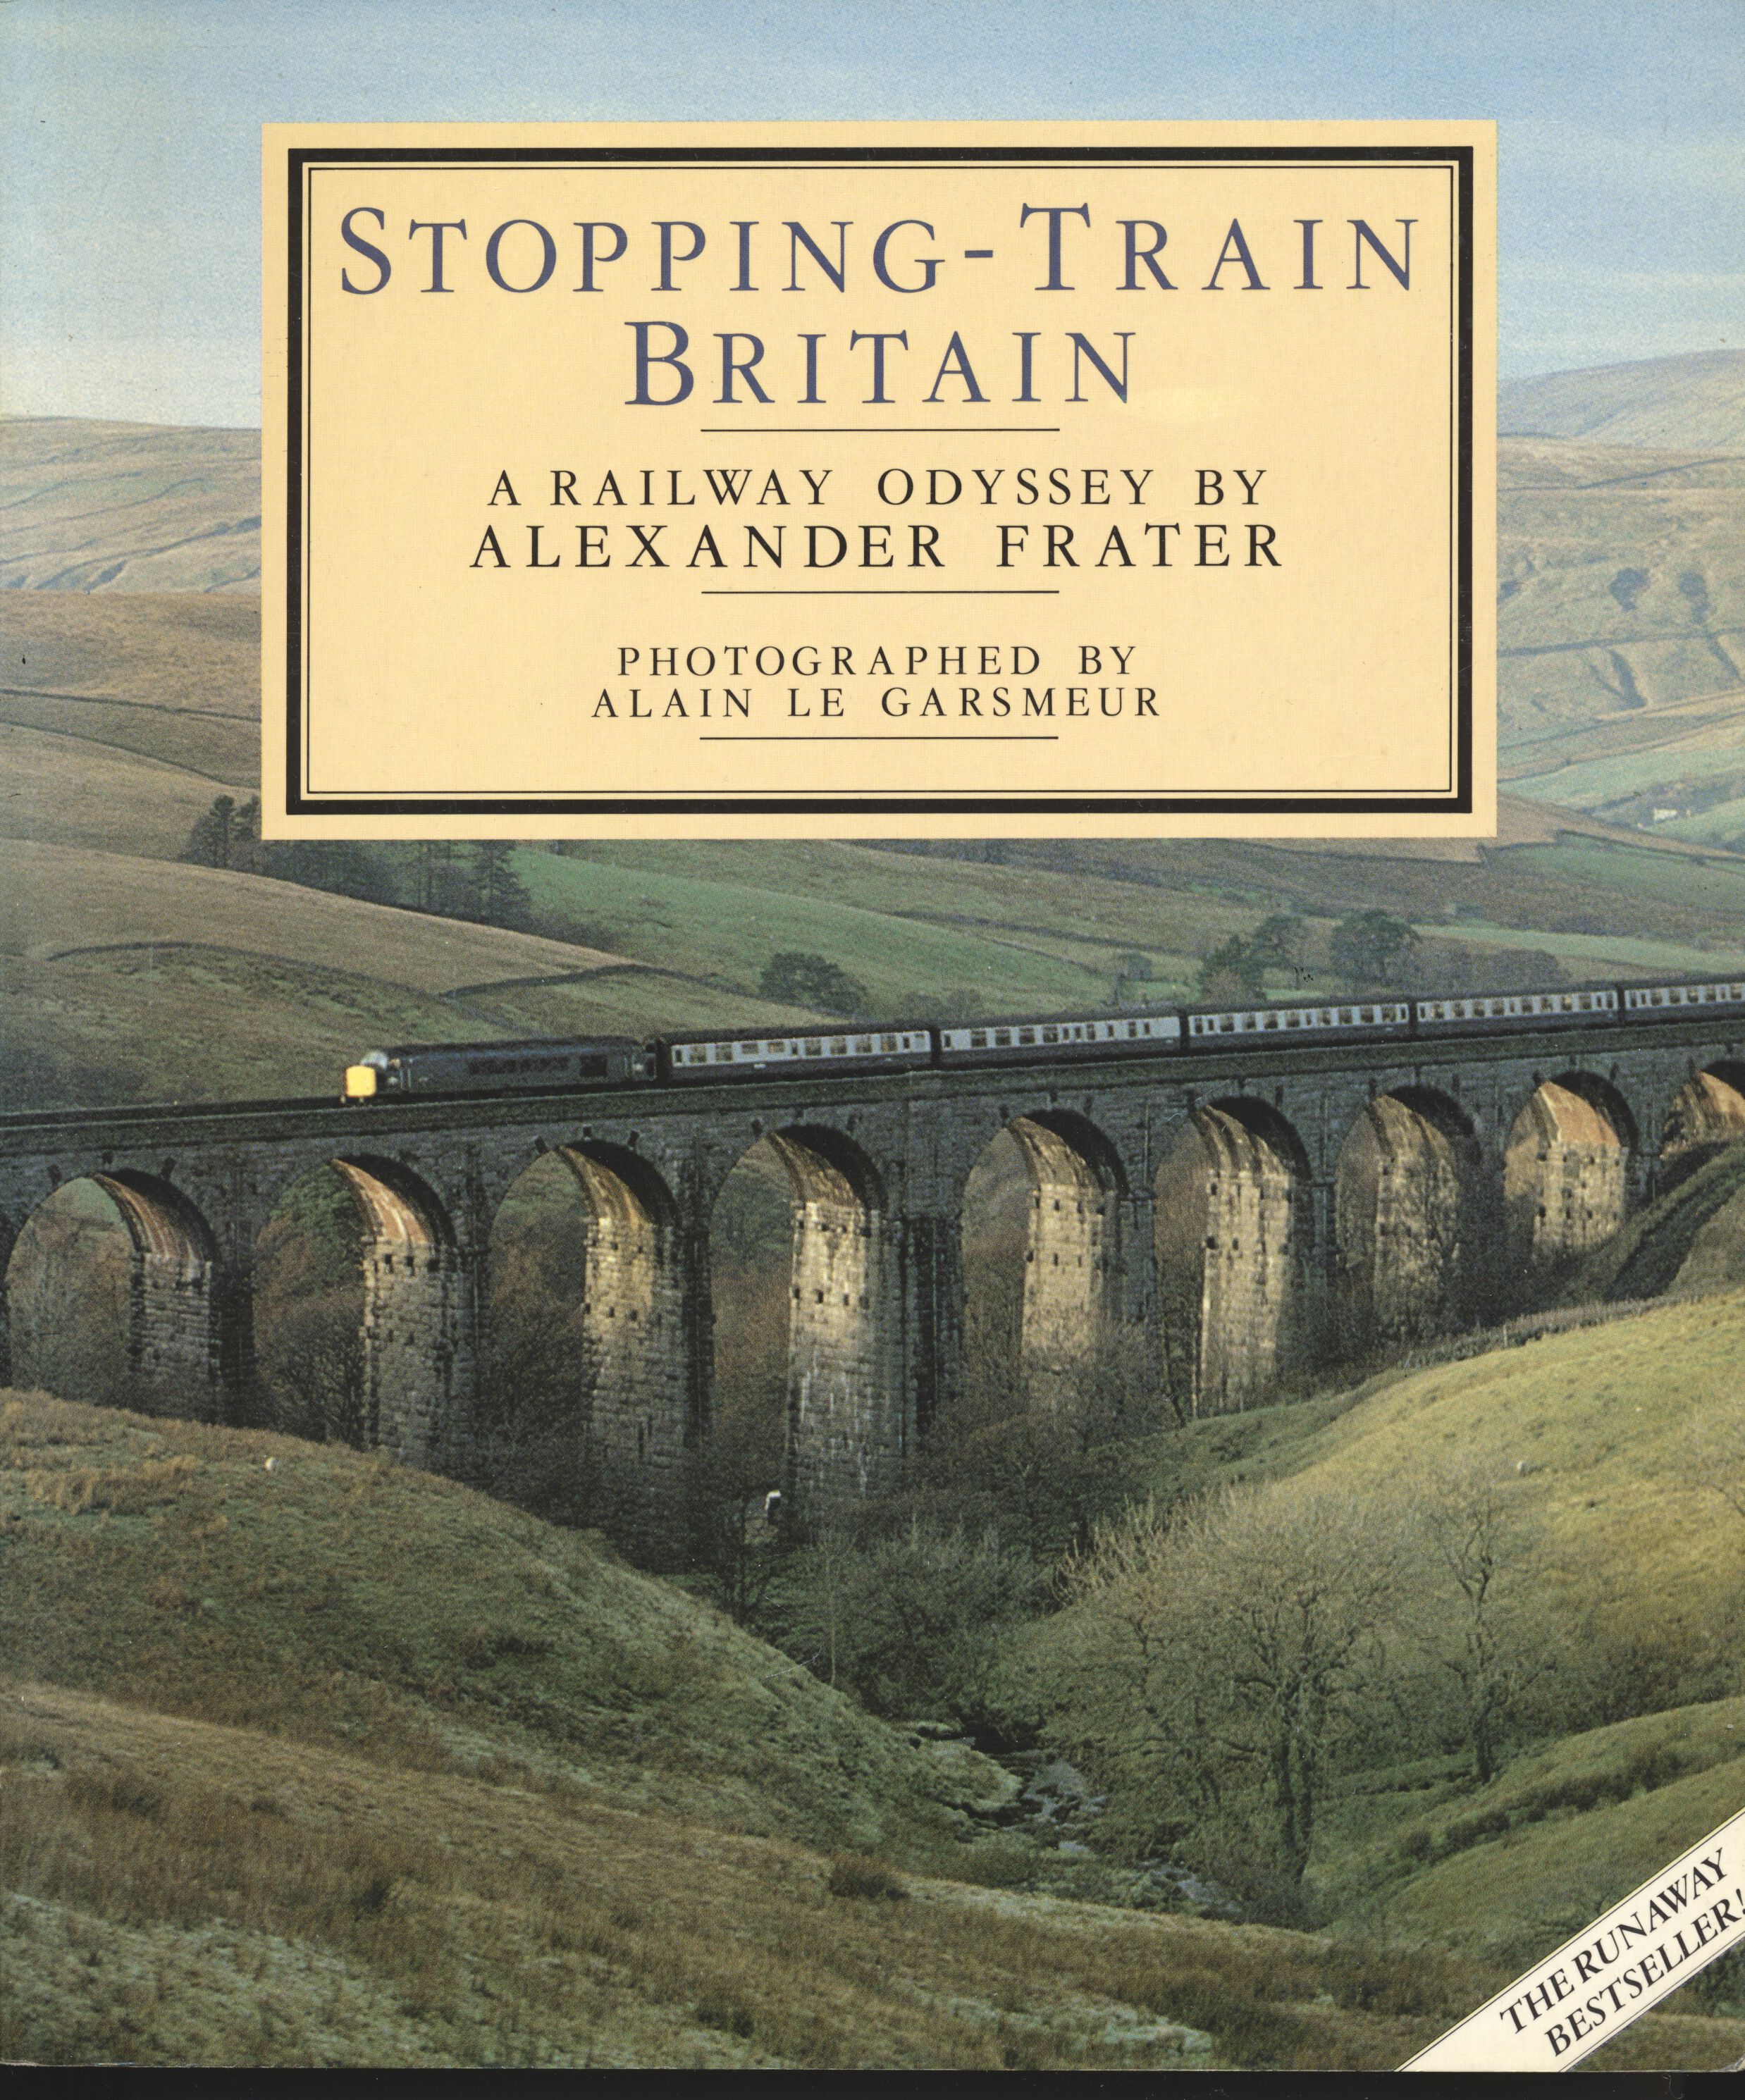 Stopping Train Britain - A Railway Oddyssey by Alexander Frater